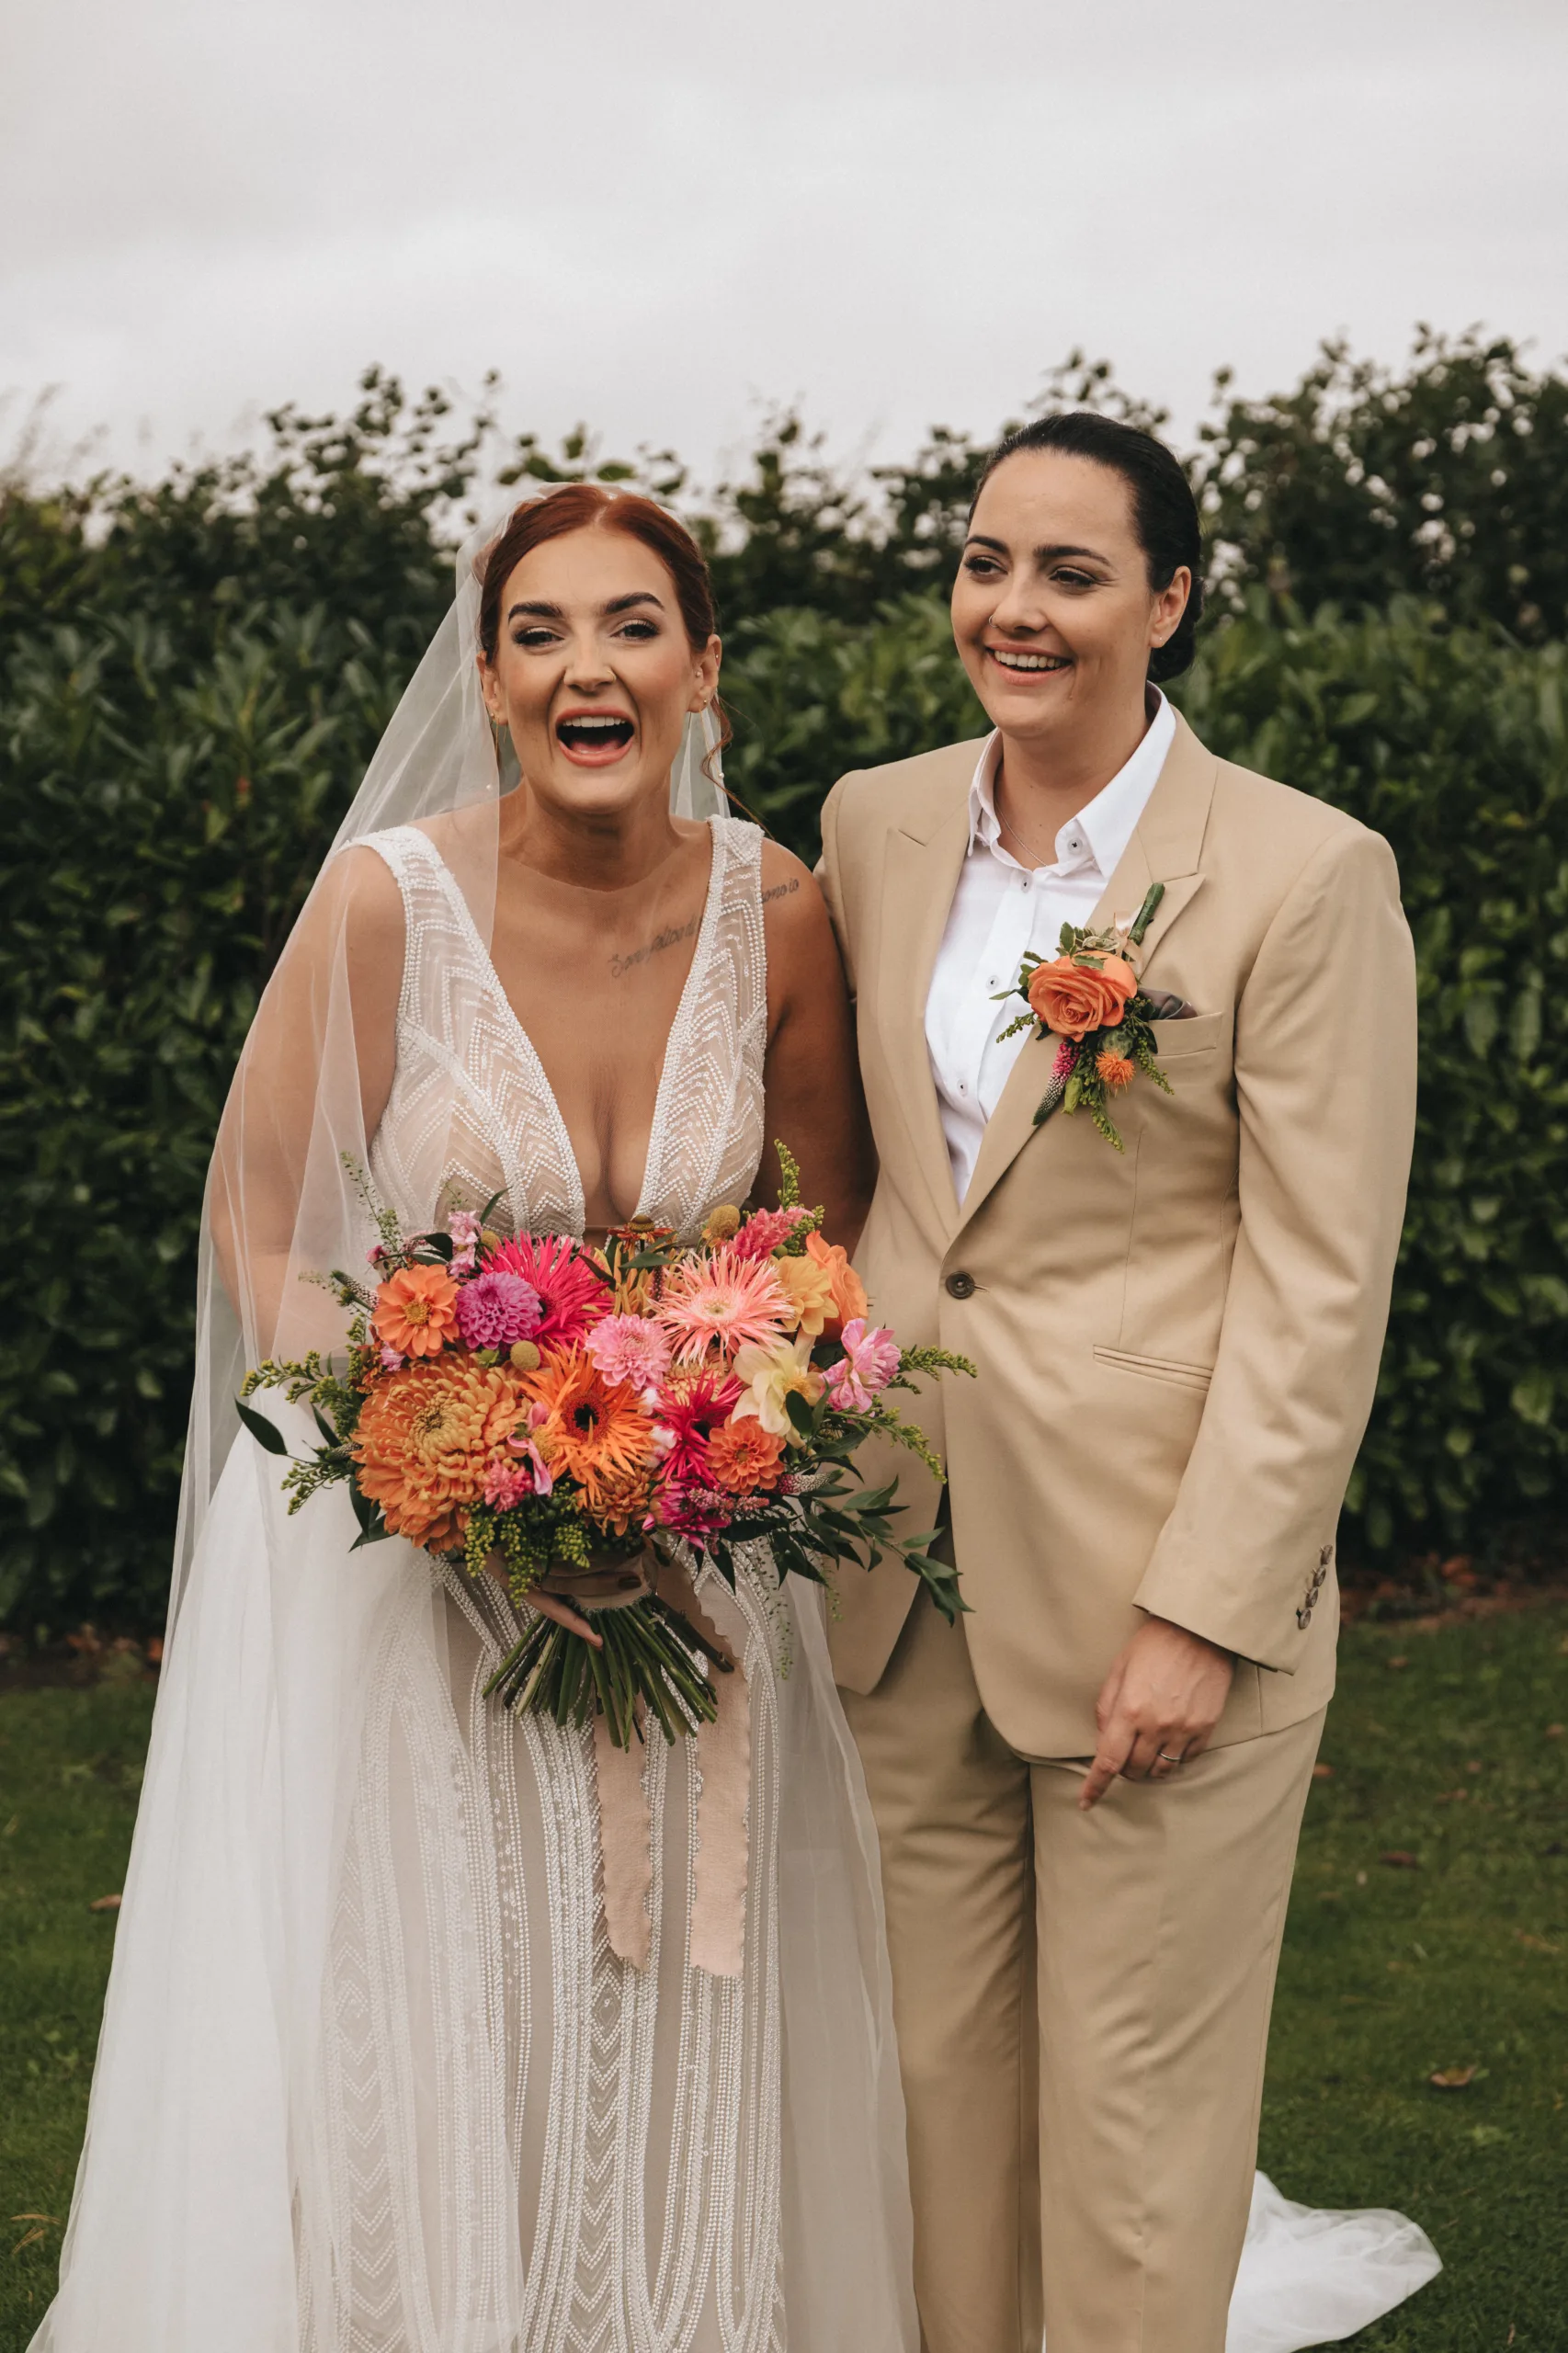 Two brides standing together in a field in Lincolnshire.